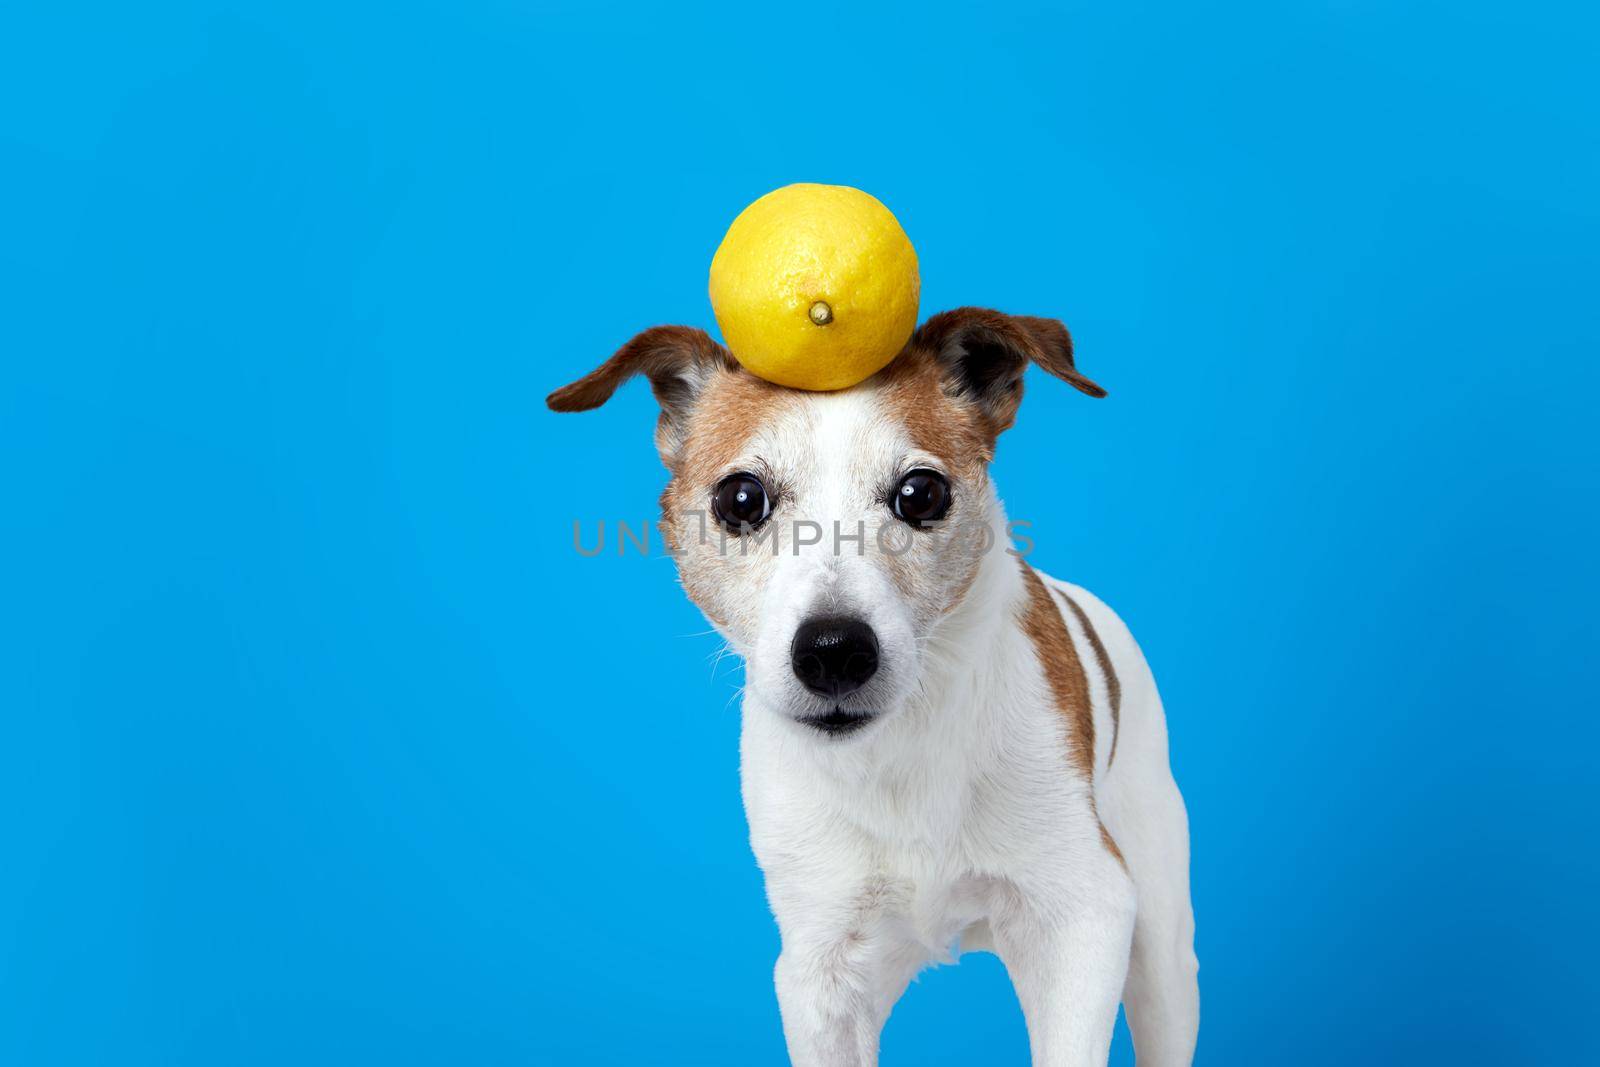 Cute funny Jack Russell Terrier dog with whole fresh yellow lemon on head looking at camera against blue background